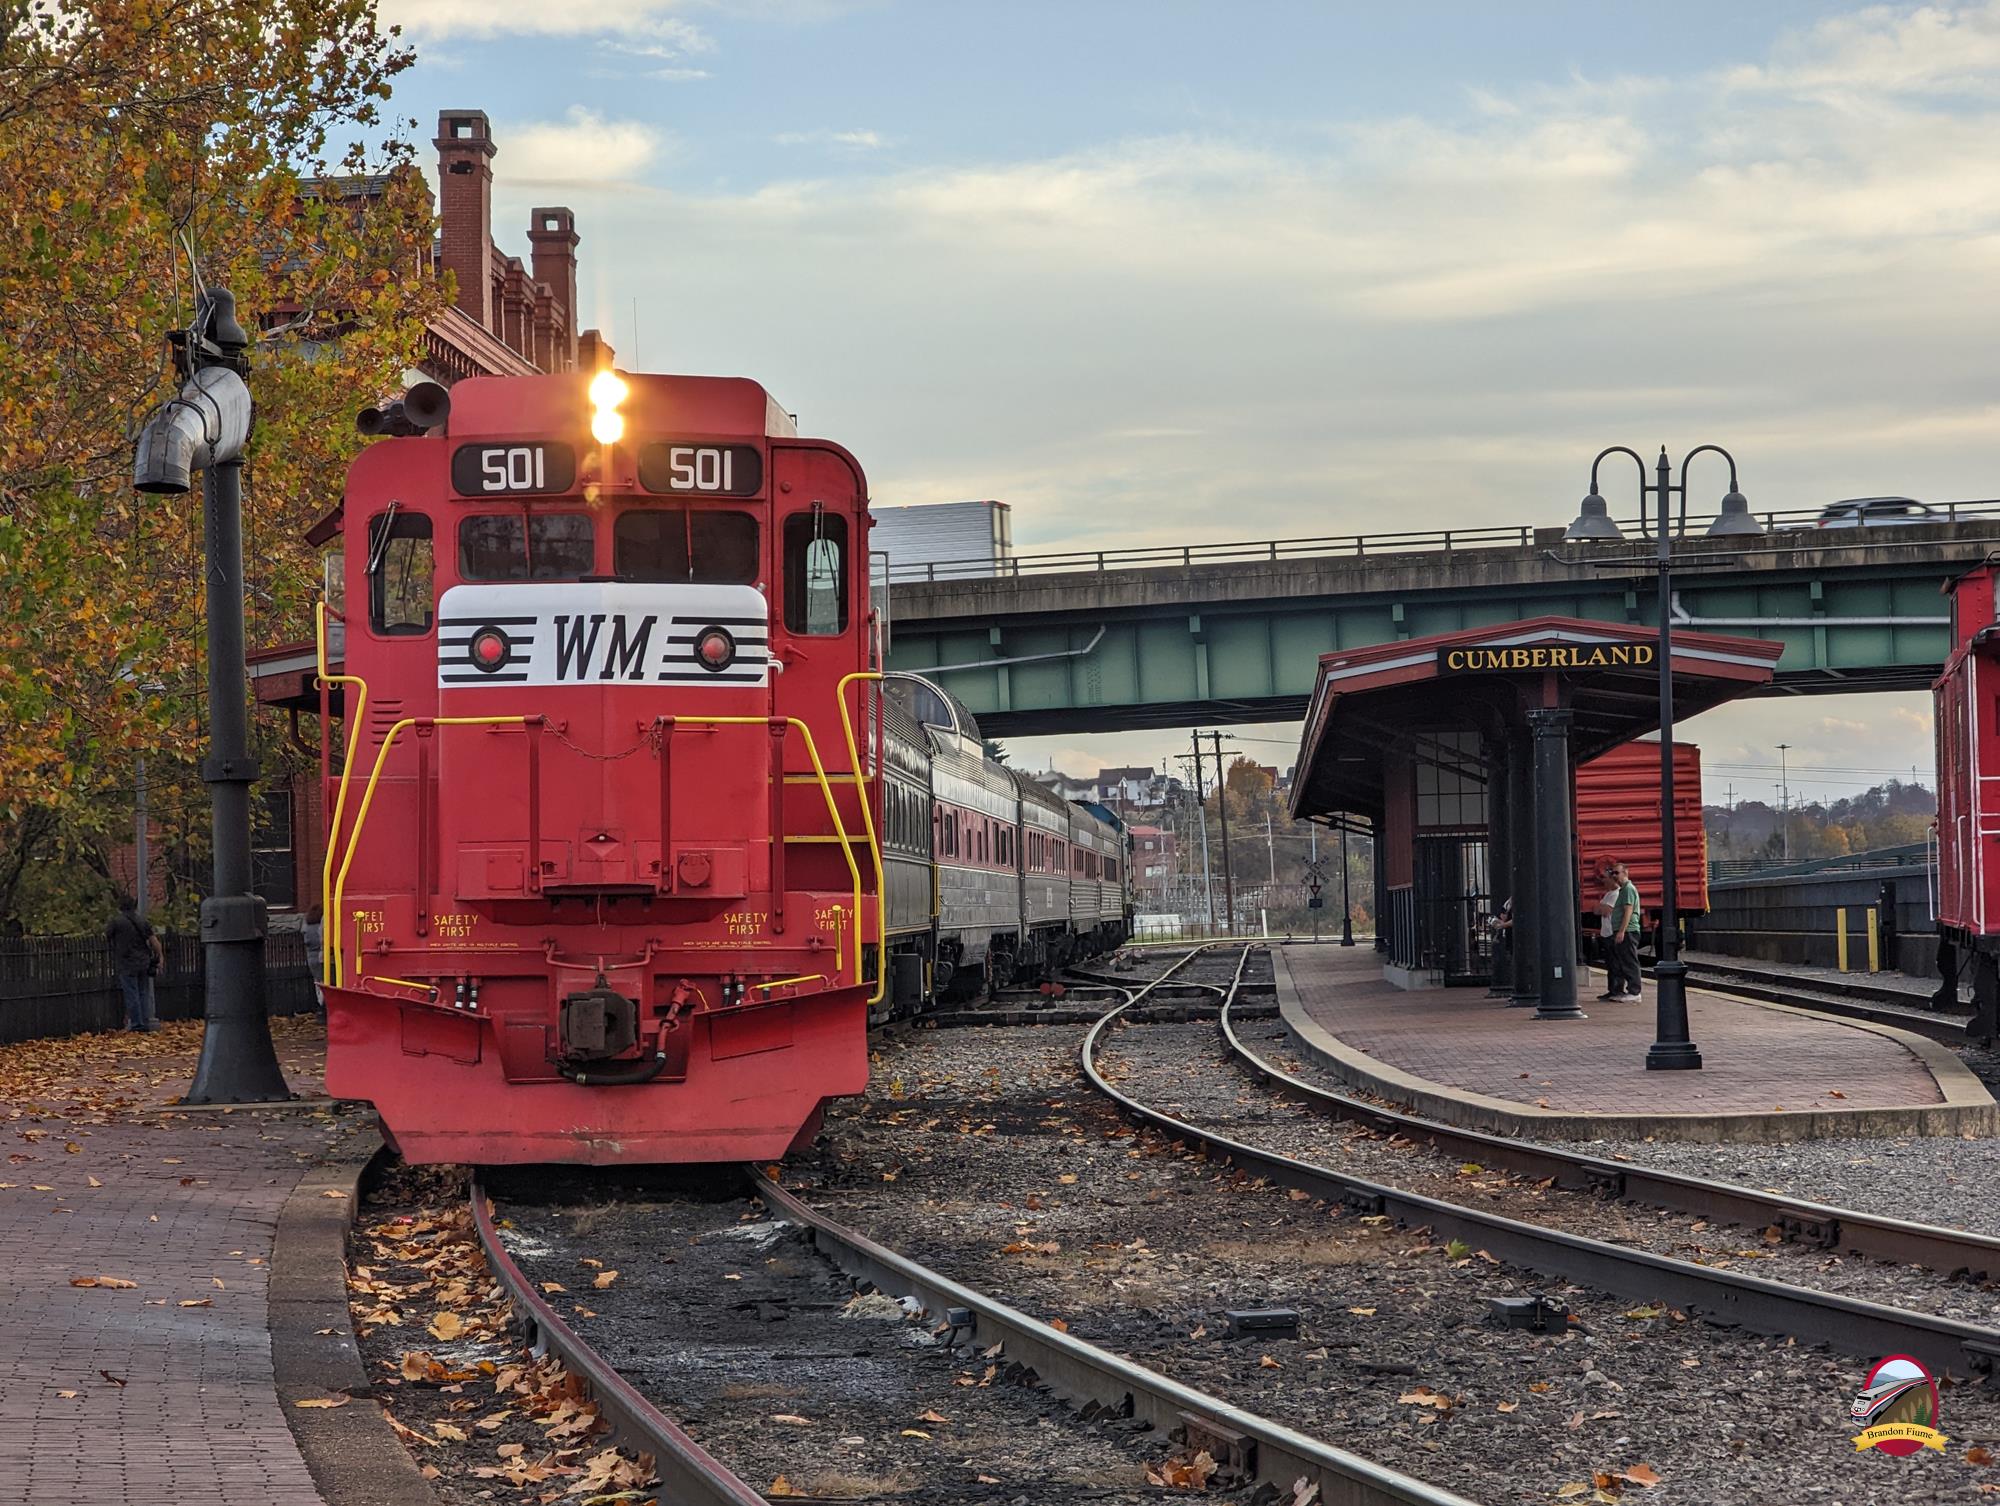 WMSR 501 is a class EMD GP30 and  is pictured in Cumberland, Maryland, USA.  This was taken along the Western Maryland Scenic on the Western Maryland Scenic Railroad. Photo Copyright: Brandon Fiume uploaded to Railroad Gallery on 11/29/2022. This photograph of WMSR 501 was taken on Saturday, November 05, 2022. All Rights Reserved. 